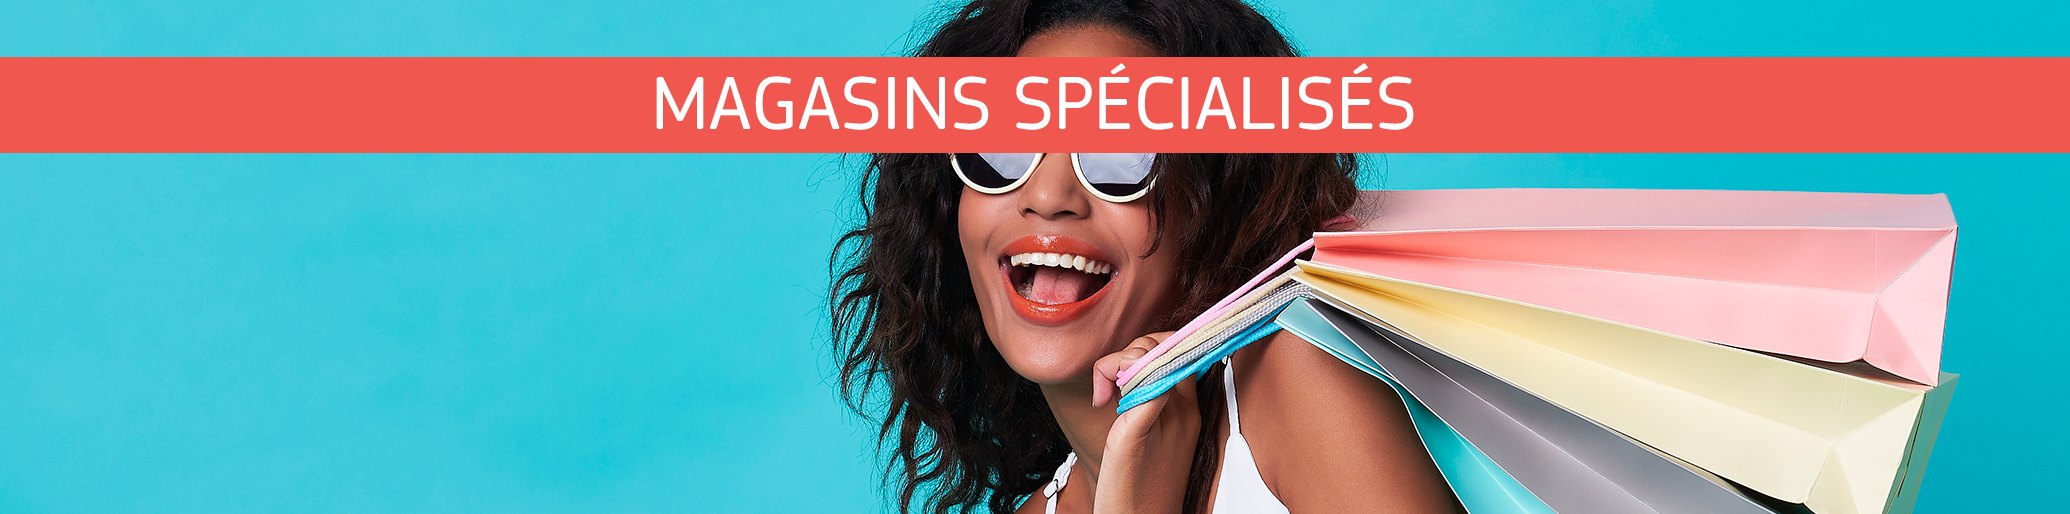 magasins-specialises